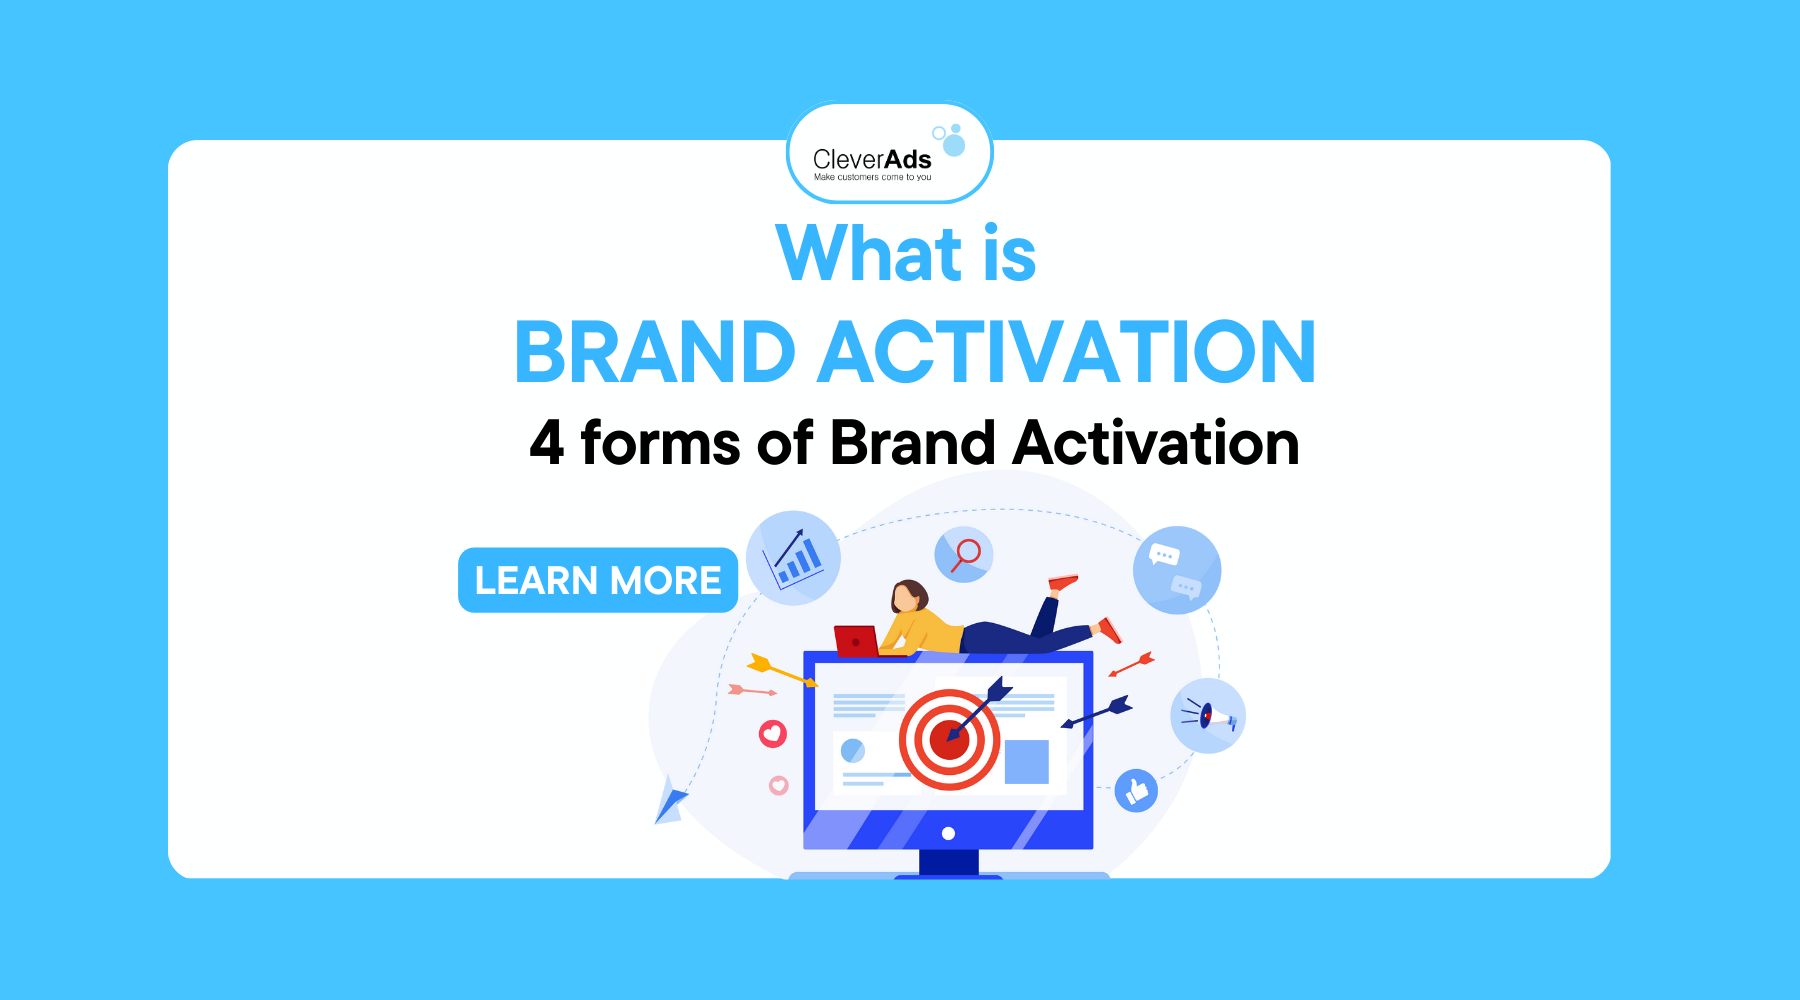  What is Brand Activation? 4 popular forms of Brand Activation